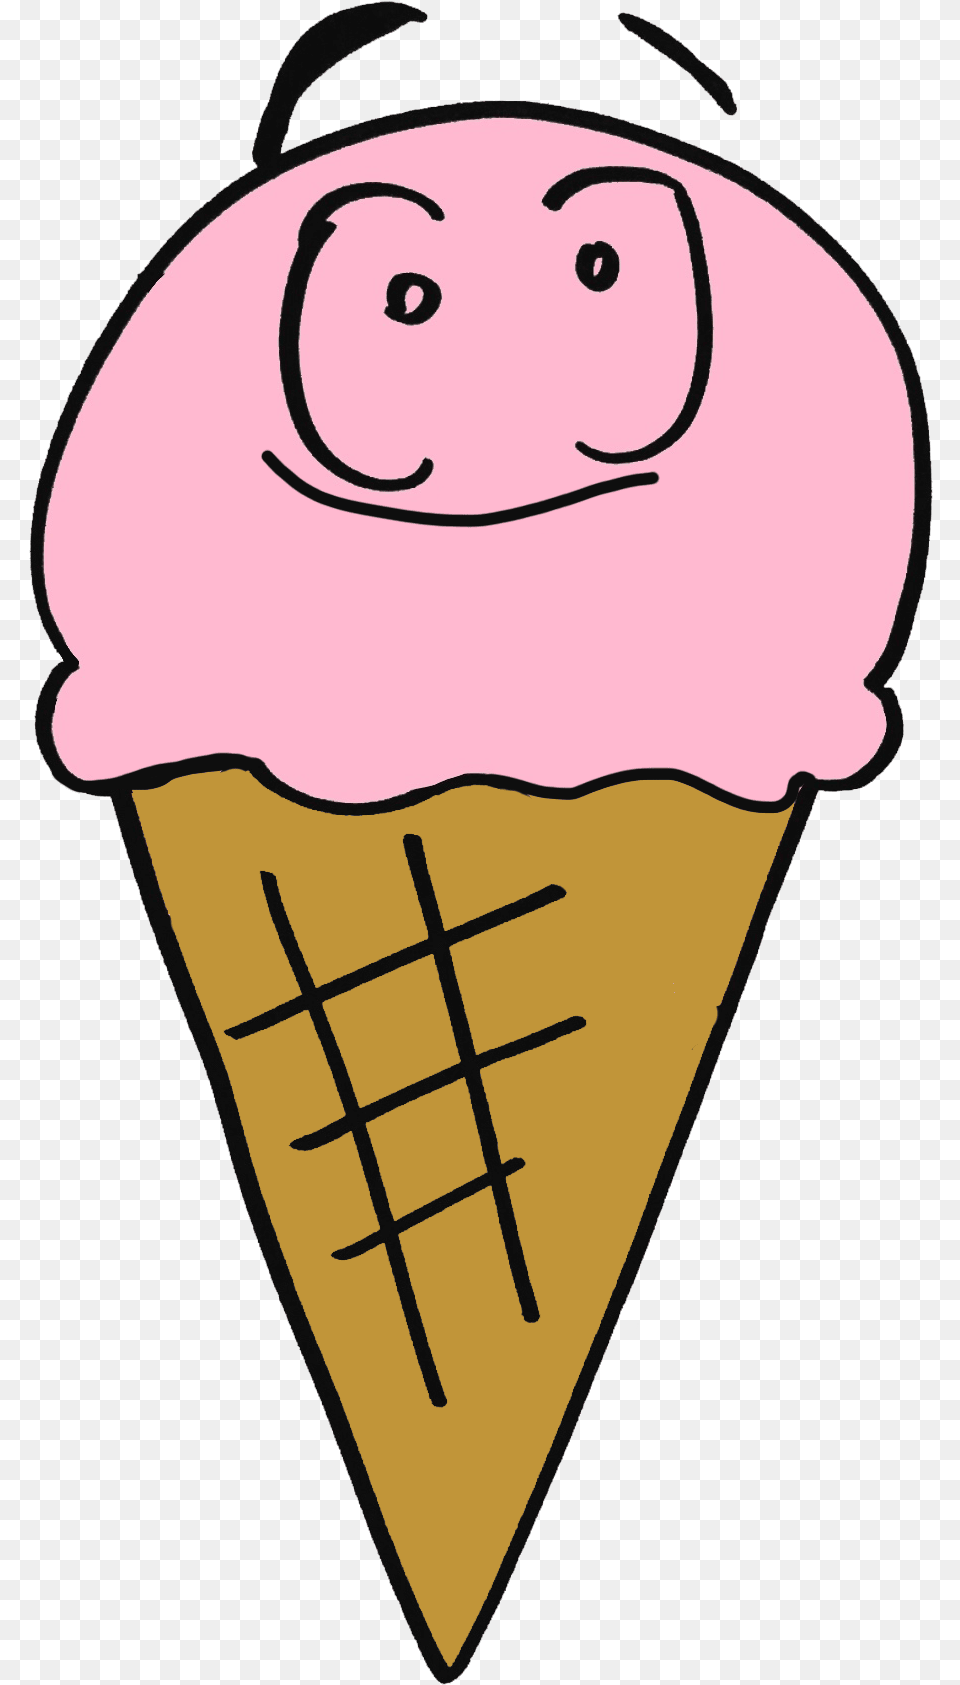 Cartoon Ice Cream With Sprinkles Clipart Download Cartoon Ice Cream With Sprinkles, Dessert, Food, Ice Cream, Cone Png Image